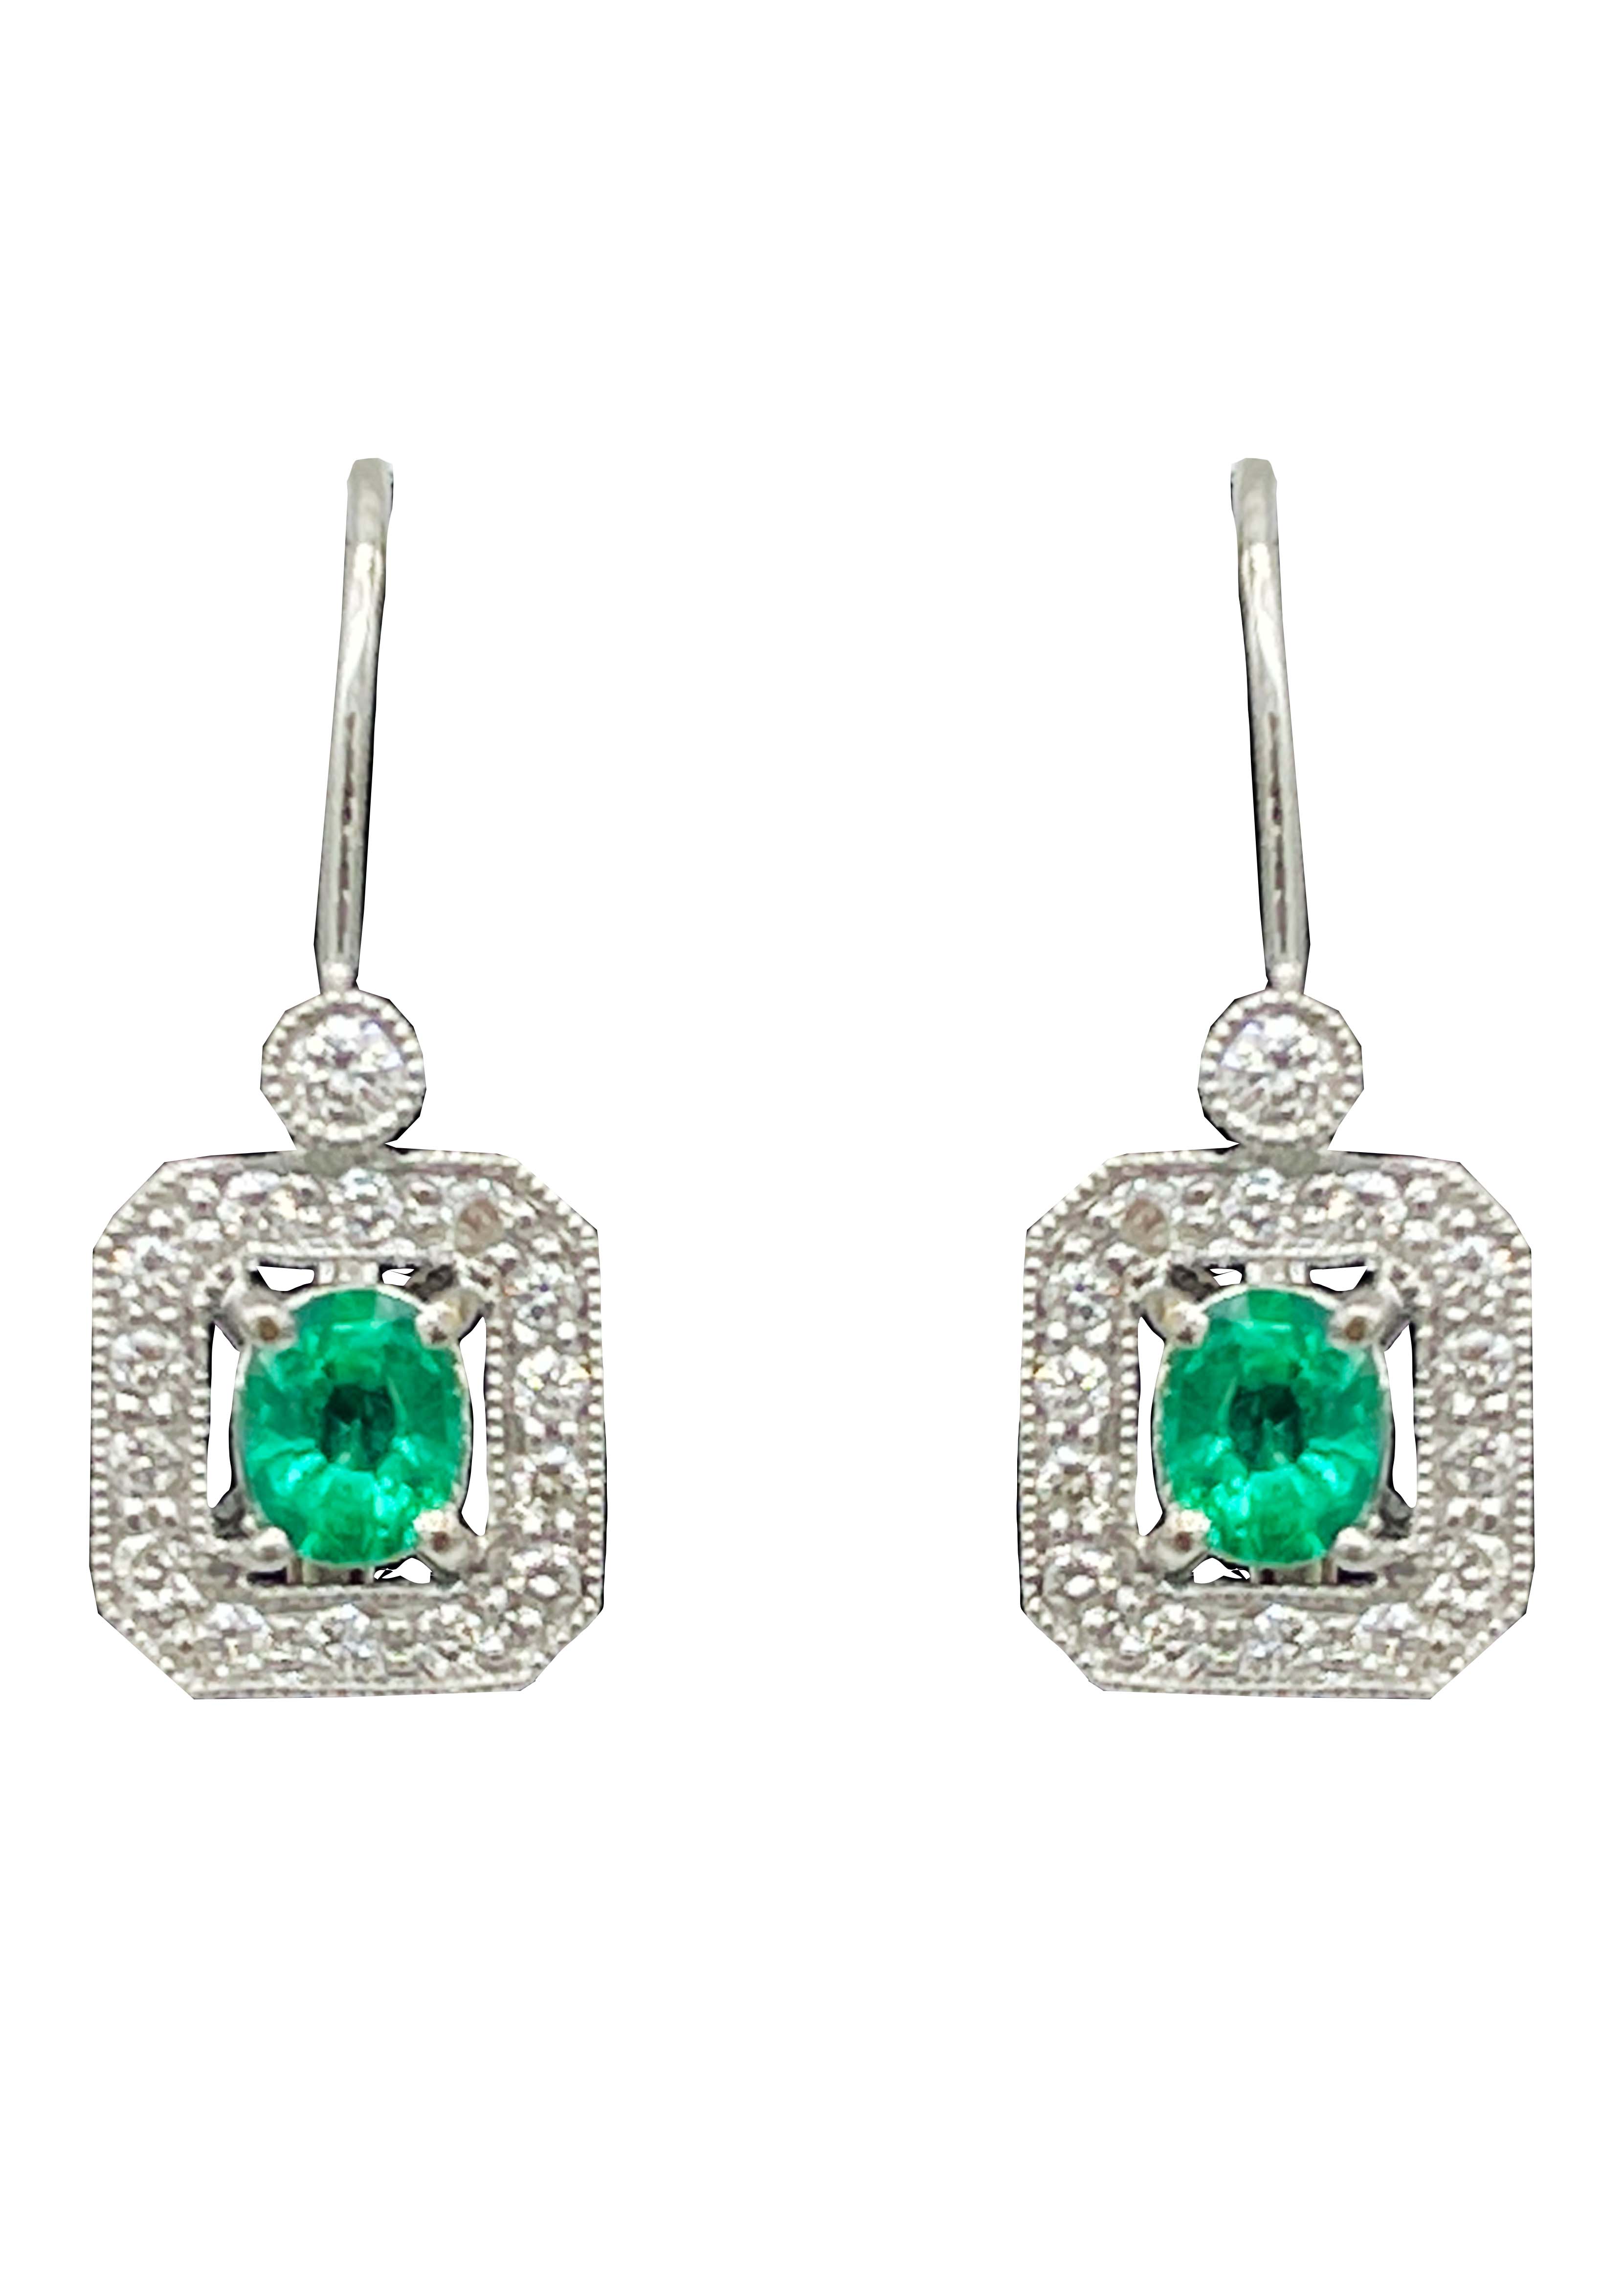 18k White Gold Emerald and Diamond Leverback Earrings Image